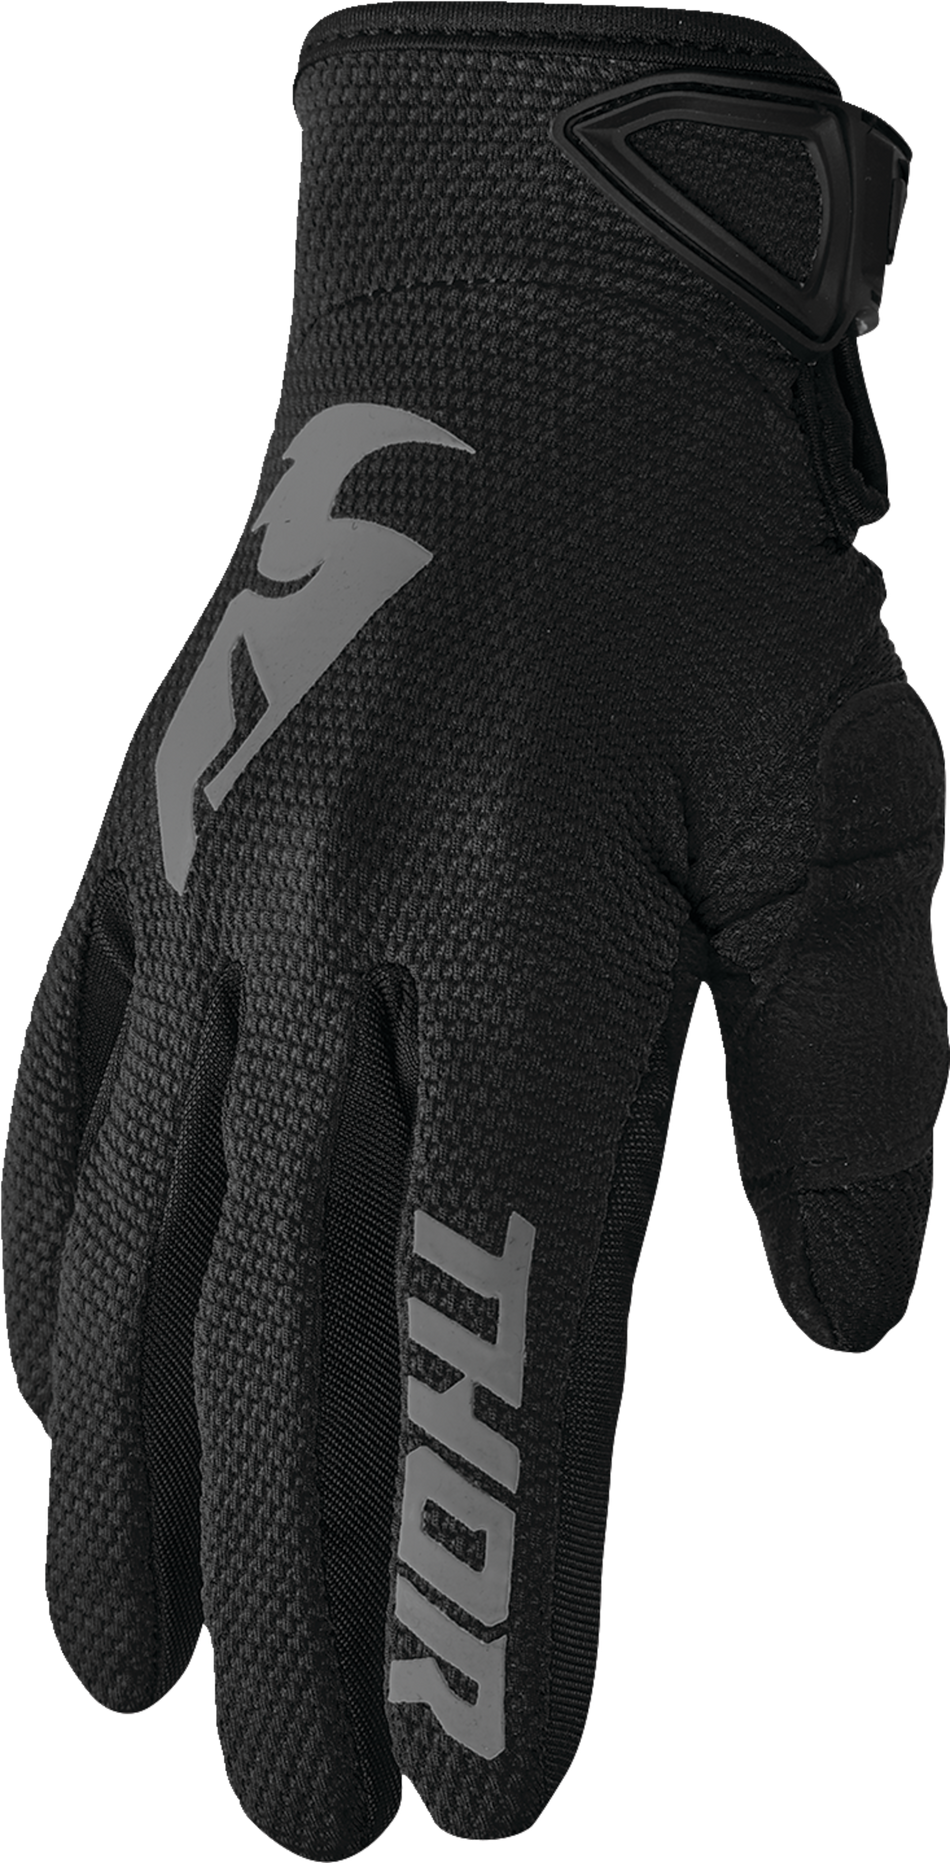 THOR Sector Gloves - Black/Gray - 2XL 3330-7254